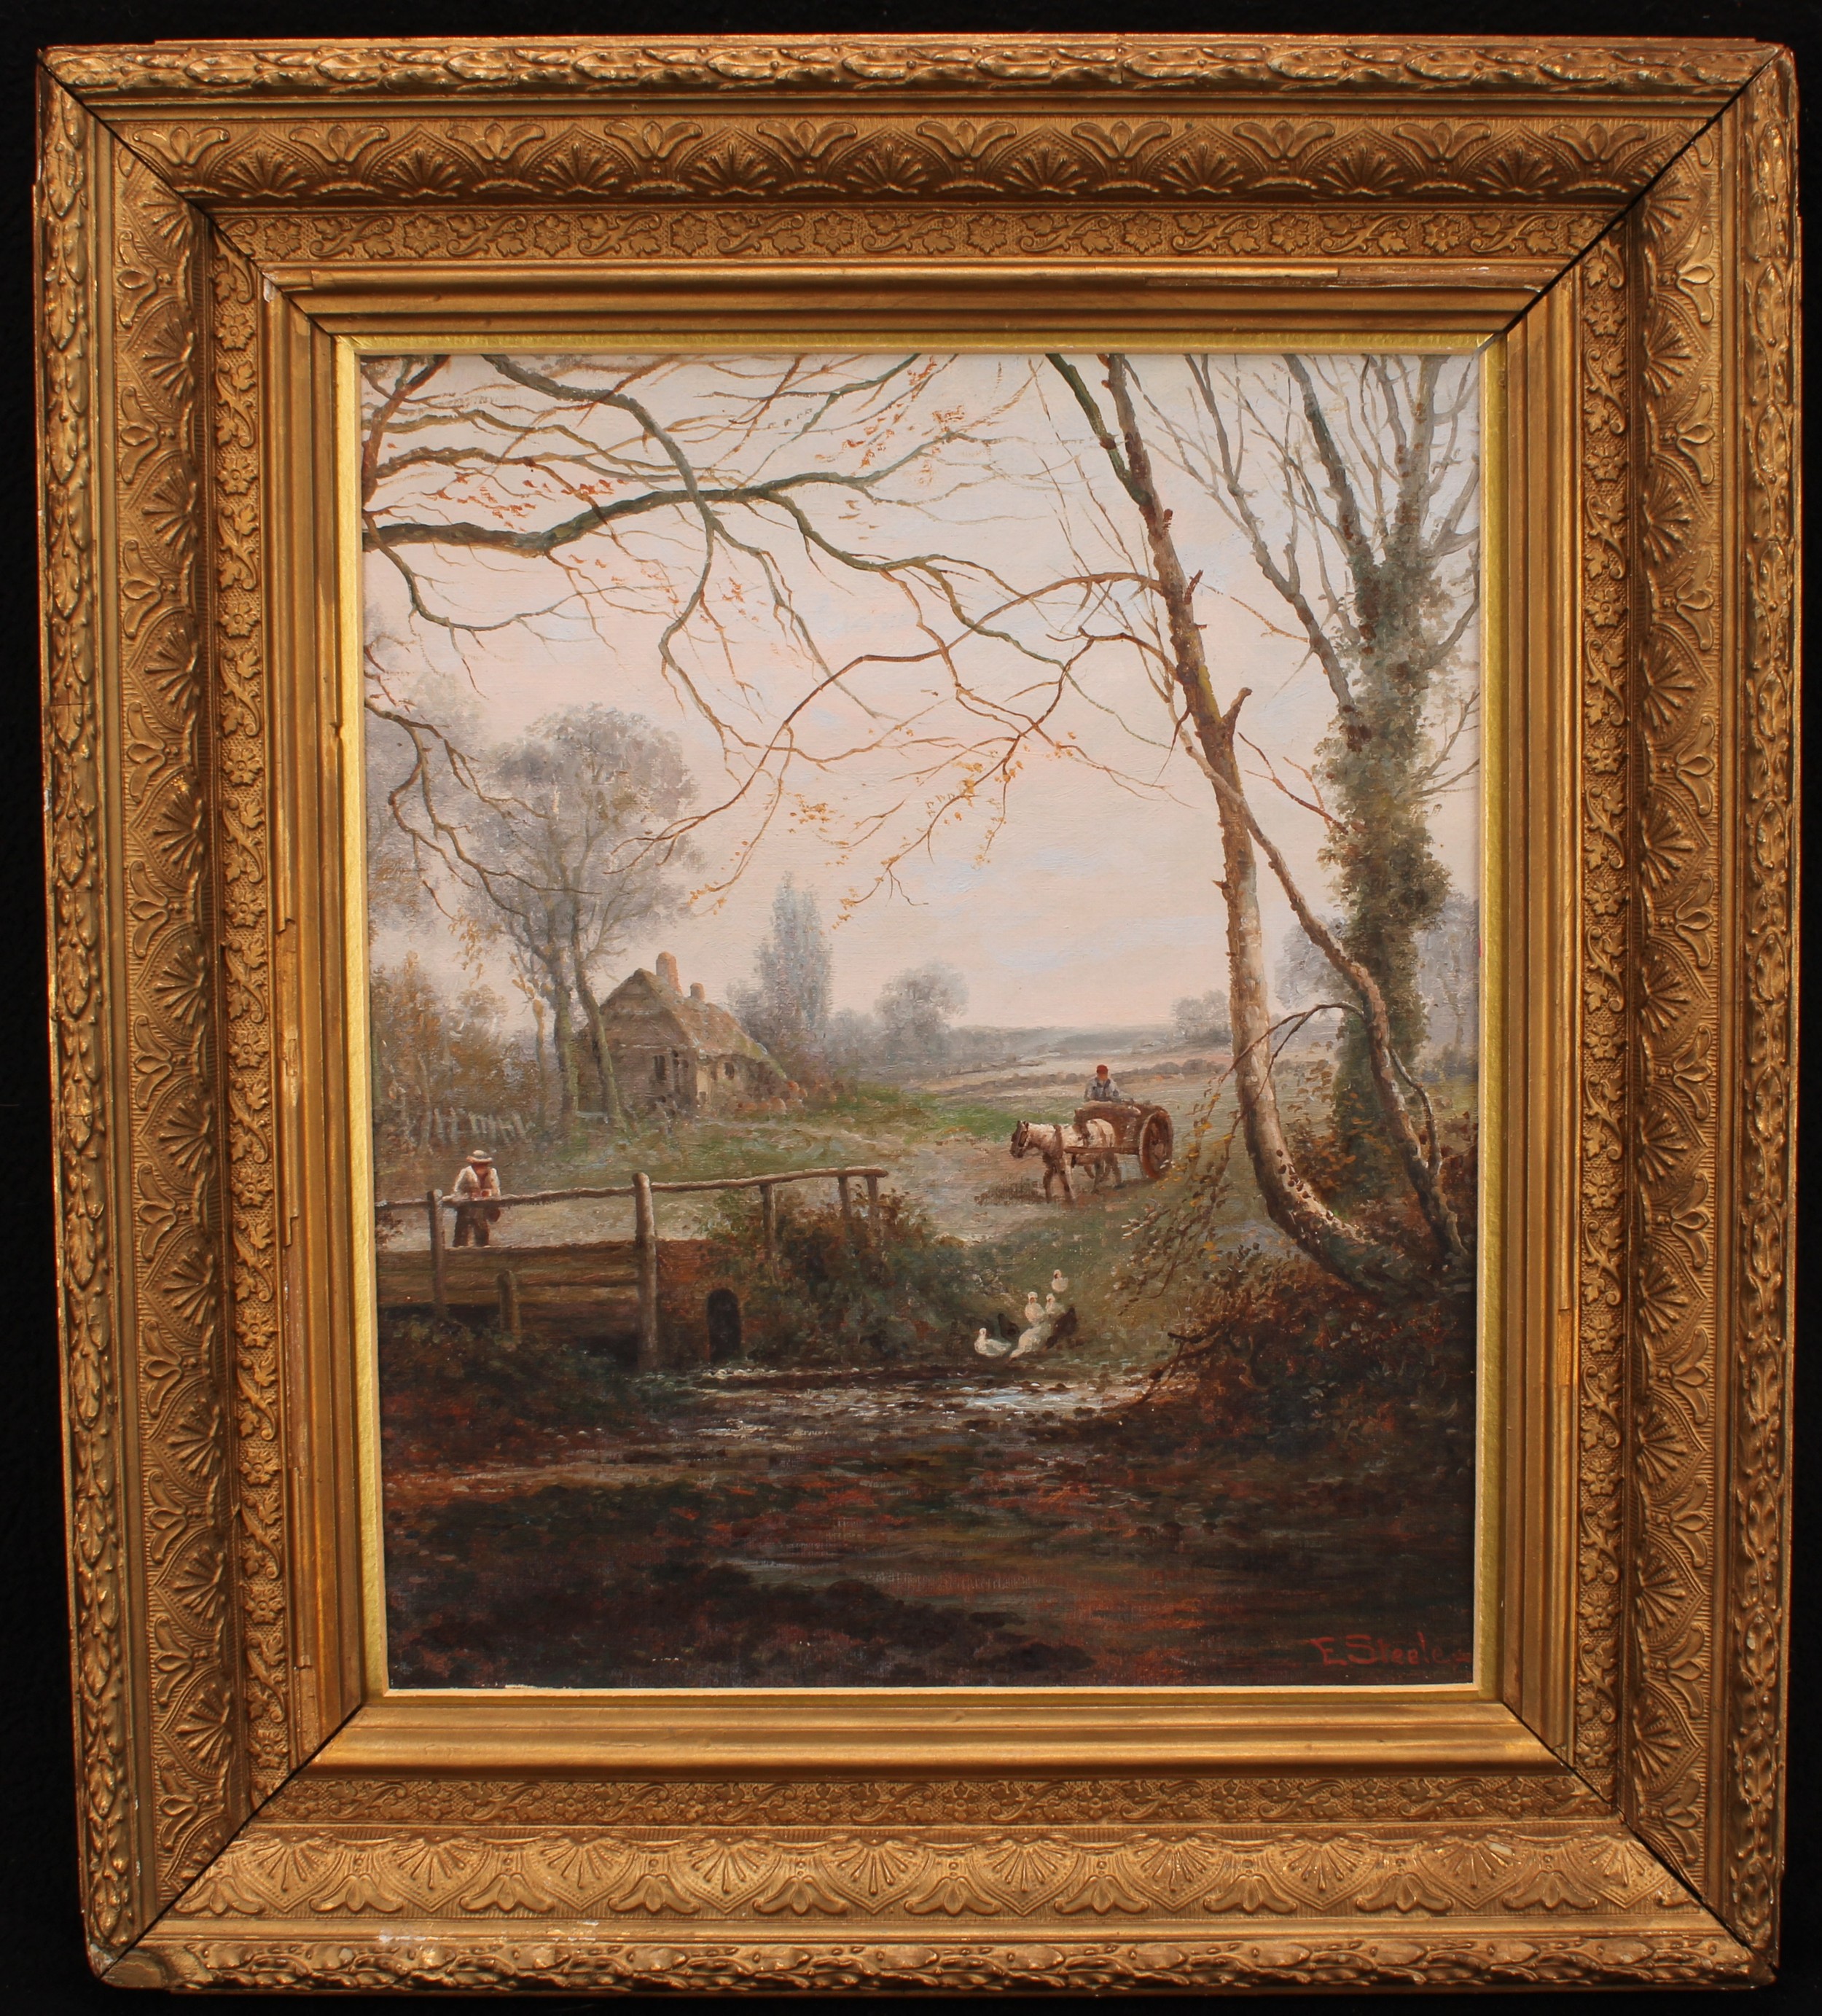 Edwin Steele (British, 1837-1898) Crossing the Ford, signed, oil on canvas, 34.5cm x 28cm - Image 2 of 4